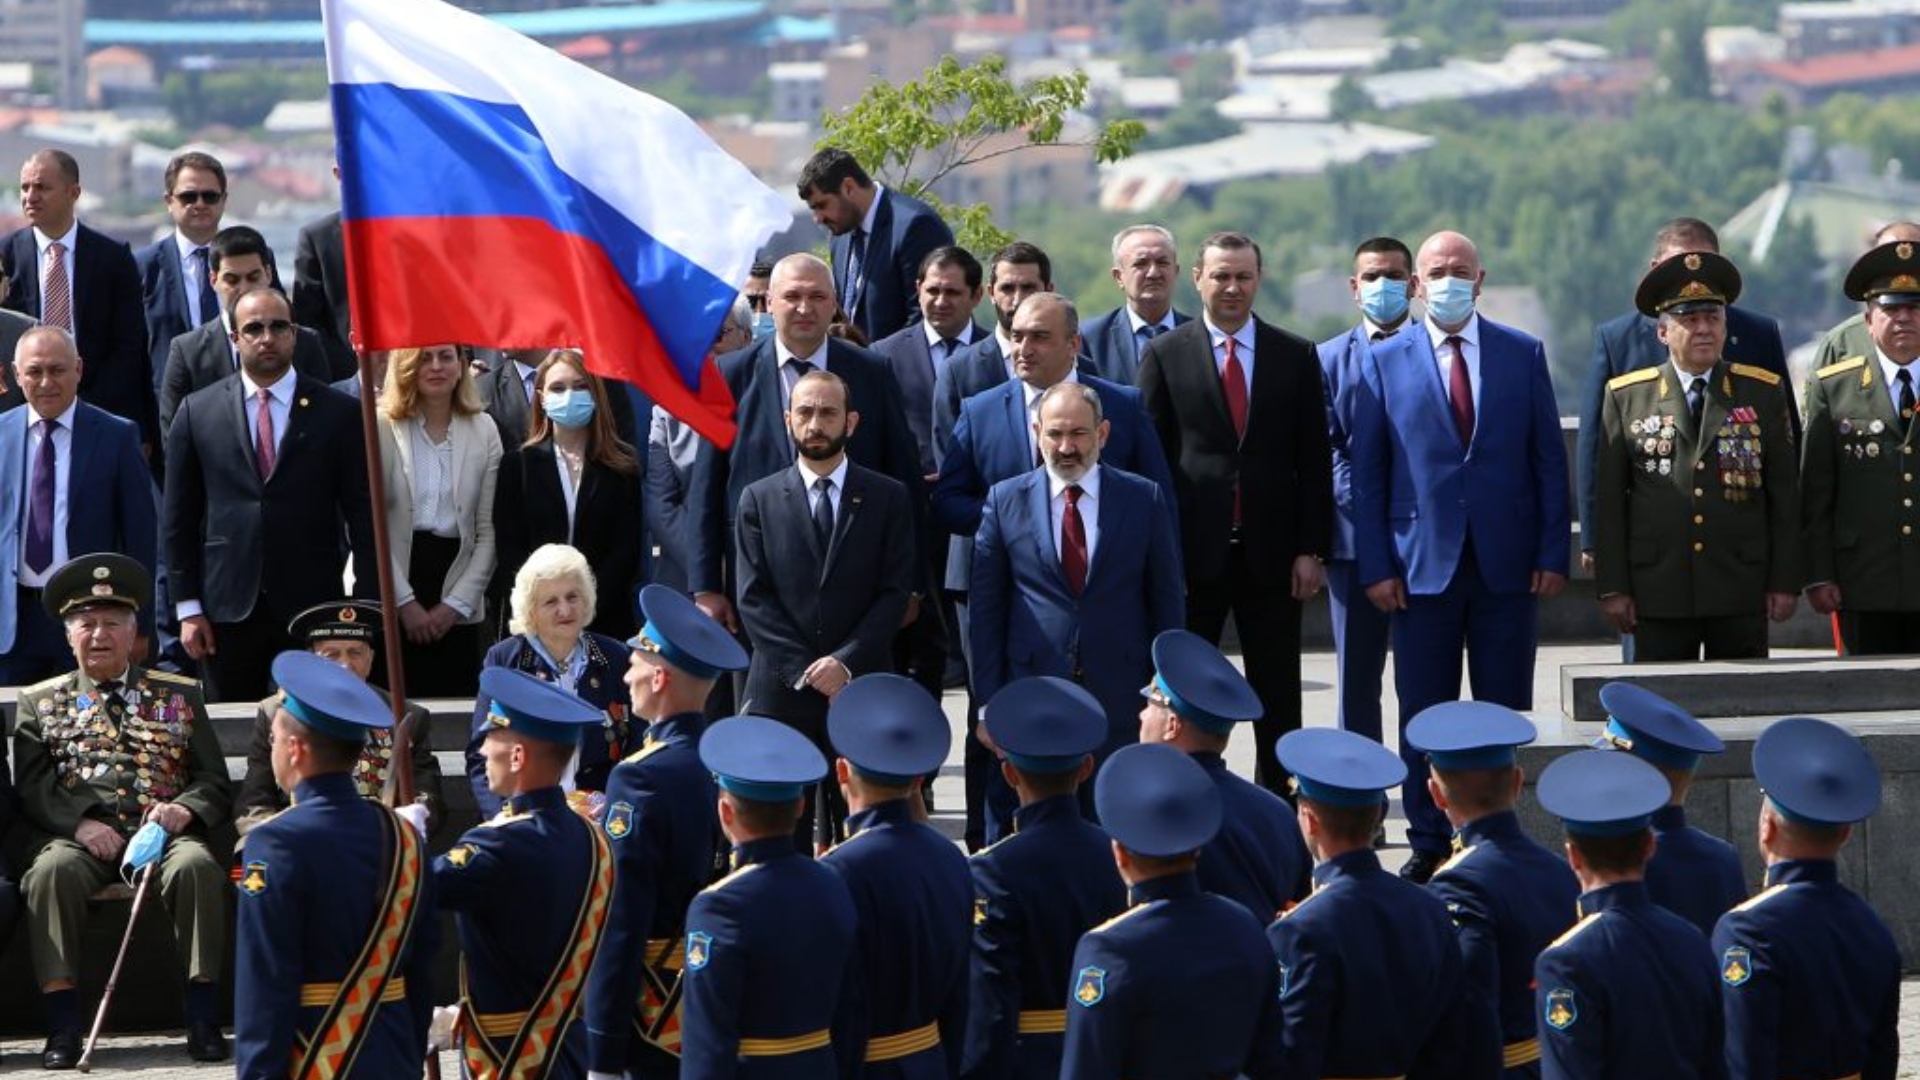 Armenia must avoid becoming entangled in the ‘Russia vs West, democracy vs authoritarianism’ dilemma